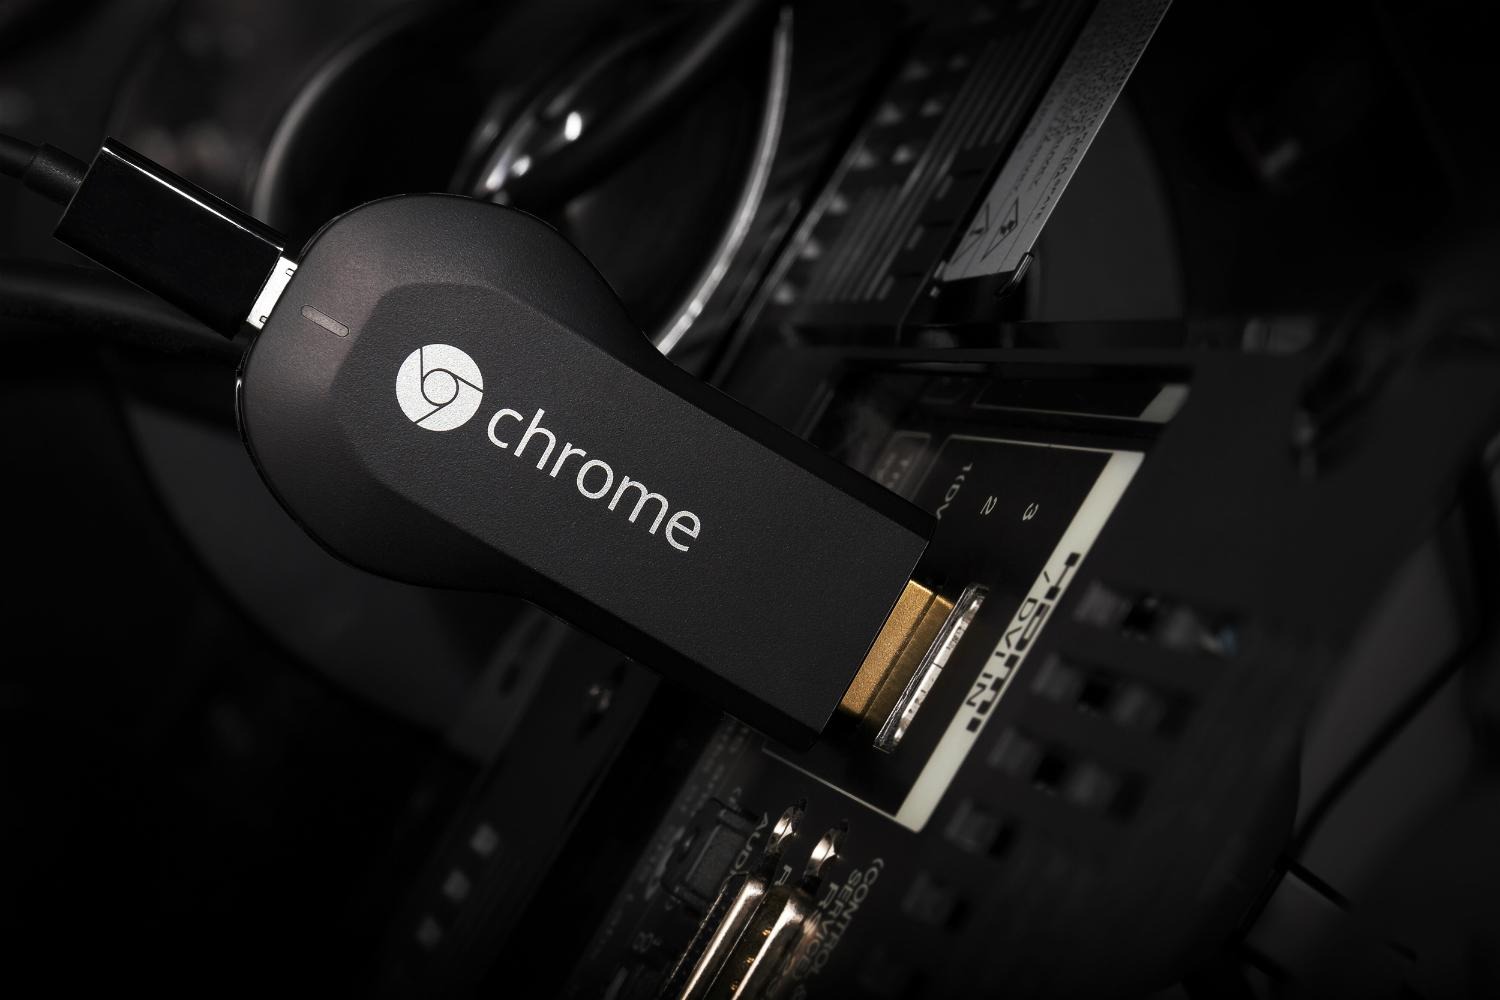 How To Watch Sling TV On Chromecast